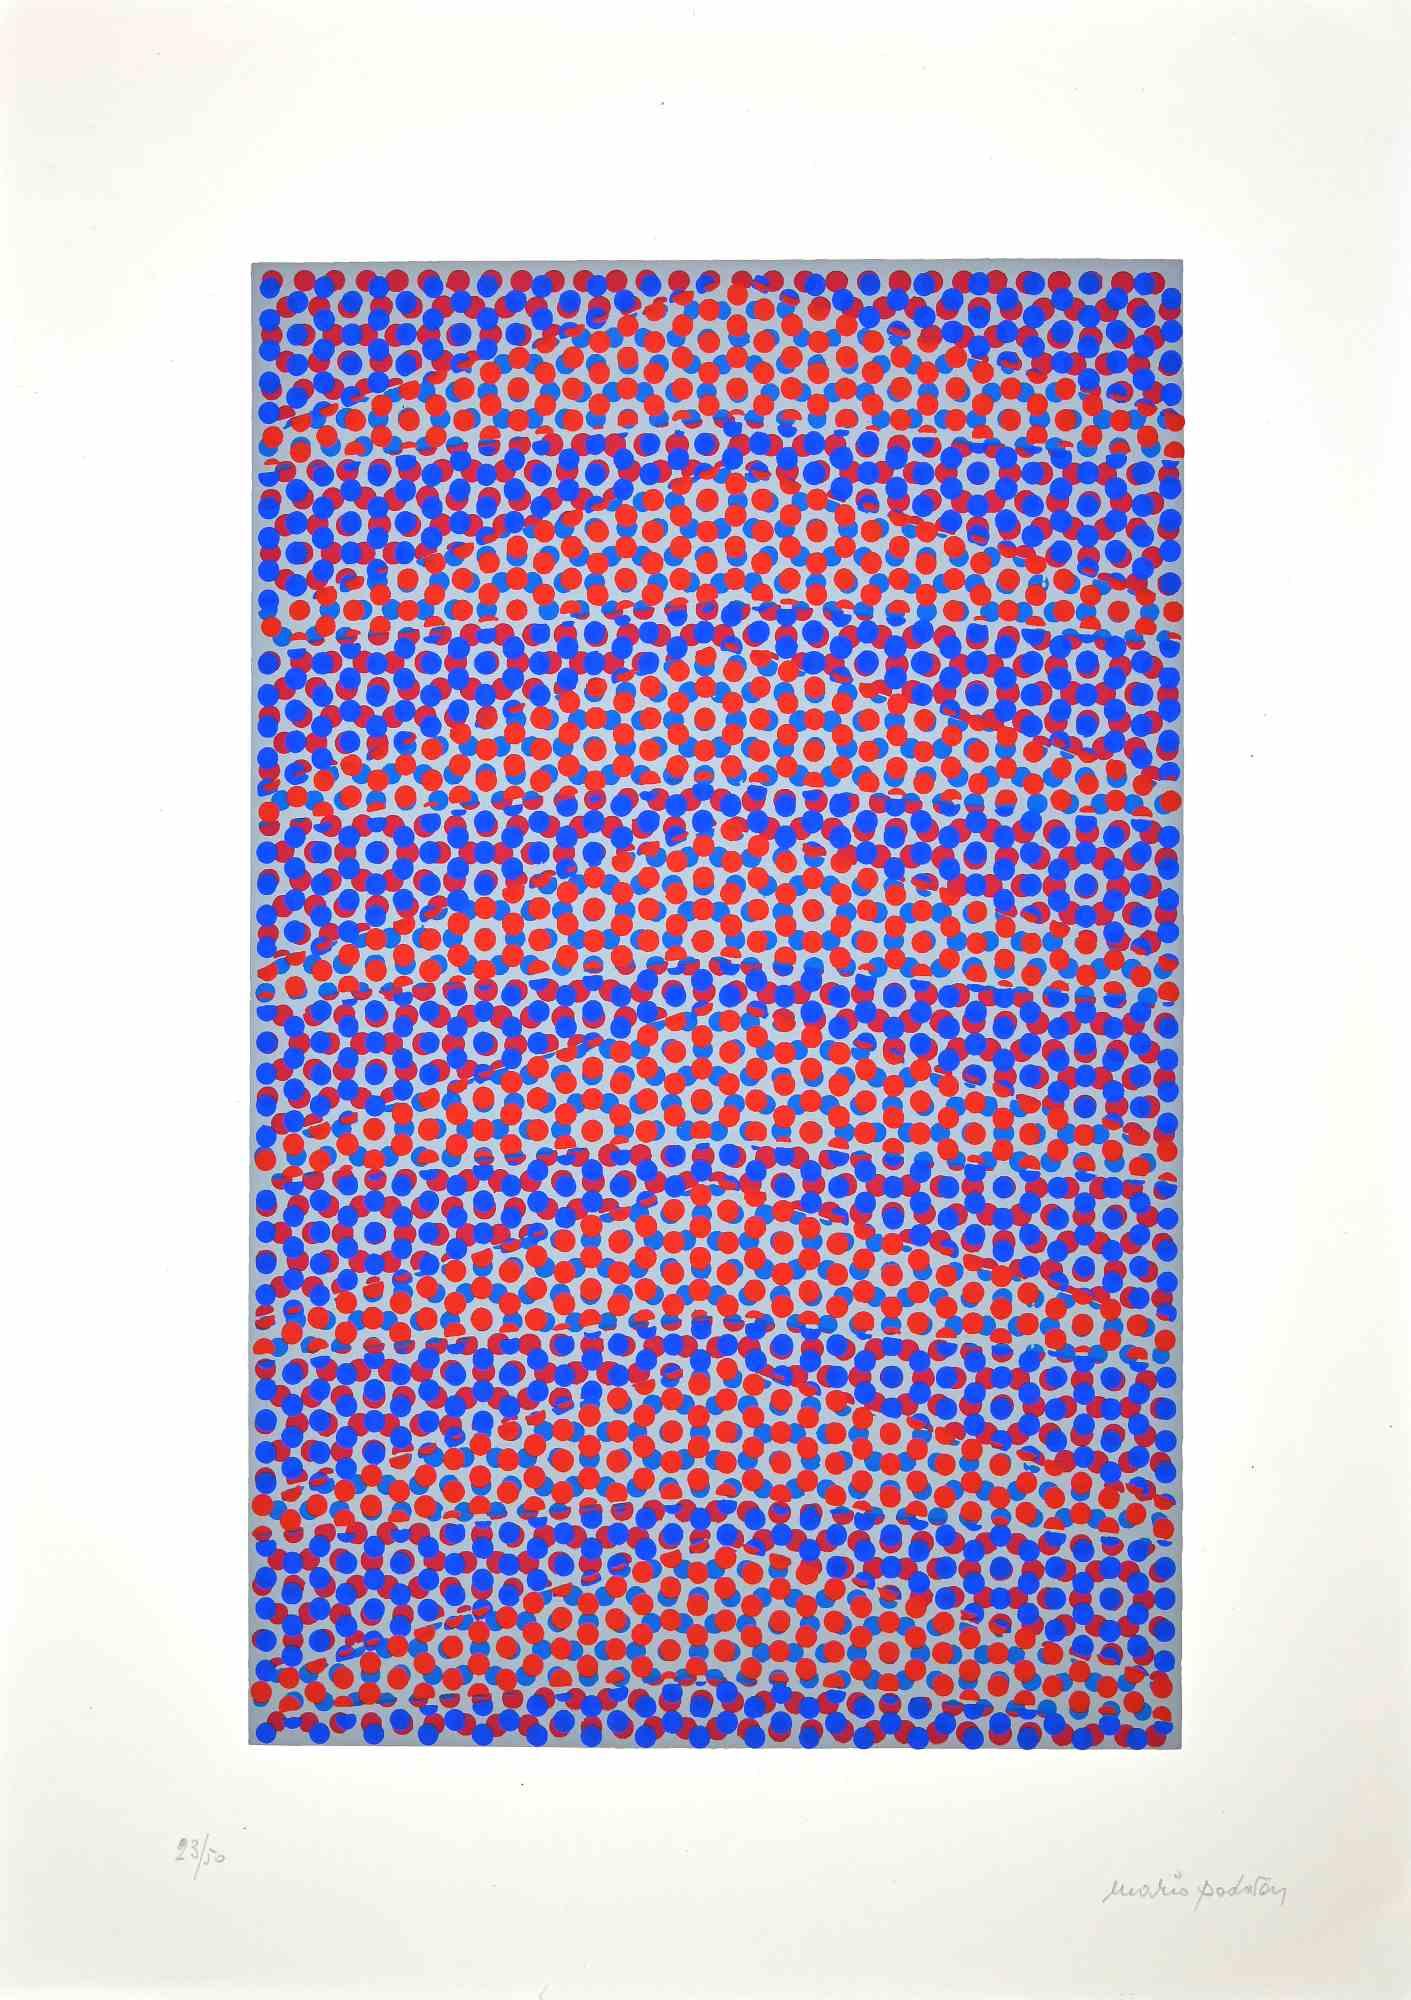 Abstract Composition is a beautiful colored screen print realized by Mario Padovan in 1977.

Hand-signed in pencil on the lower right. Numbered on the lower left, the edition of 50 Prints.

Good conditions.

Authenticity label by La Nuova Foglio on